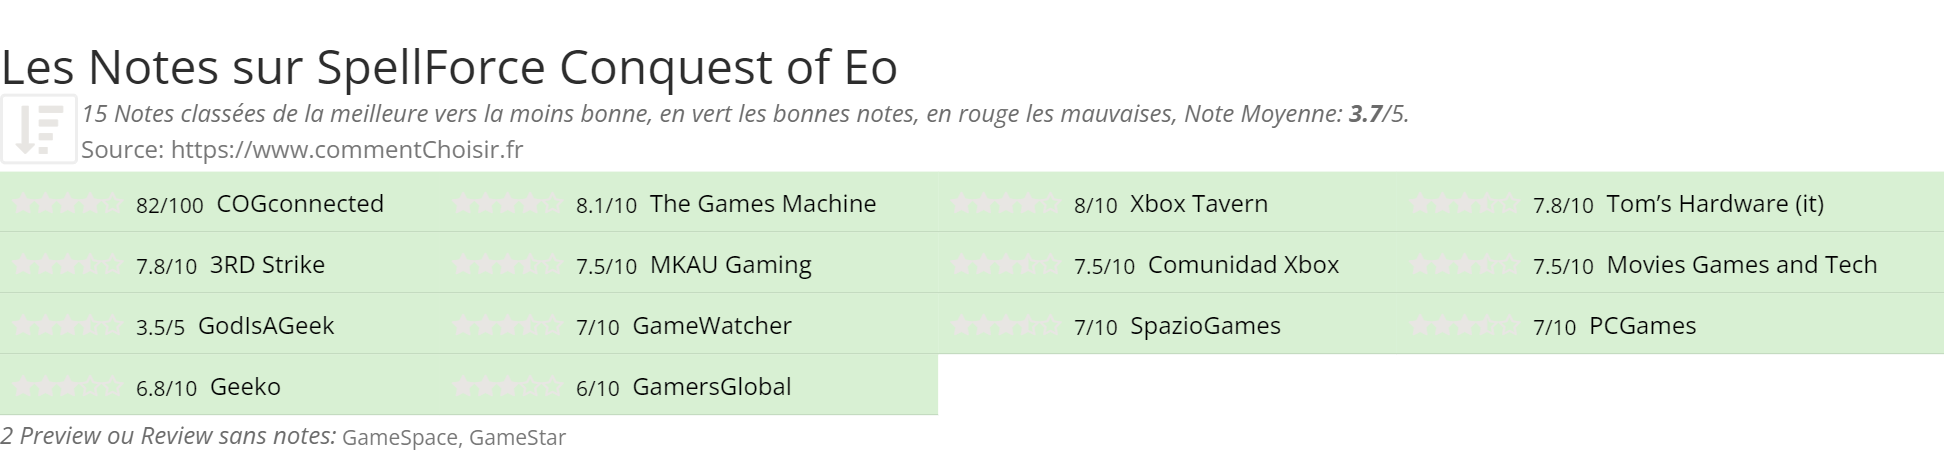 Ratings SpellForce Conquest of Eo